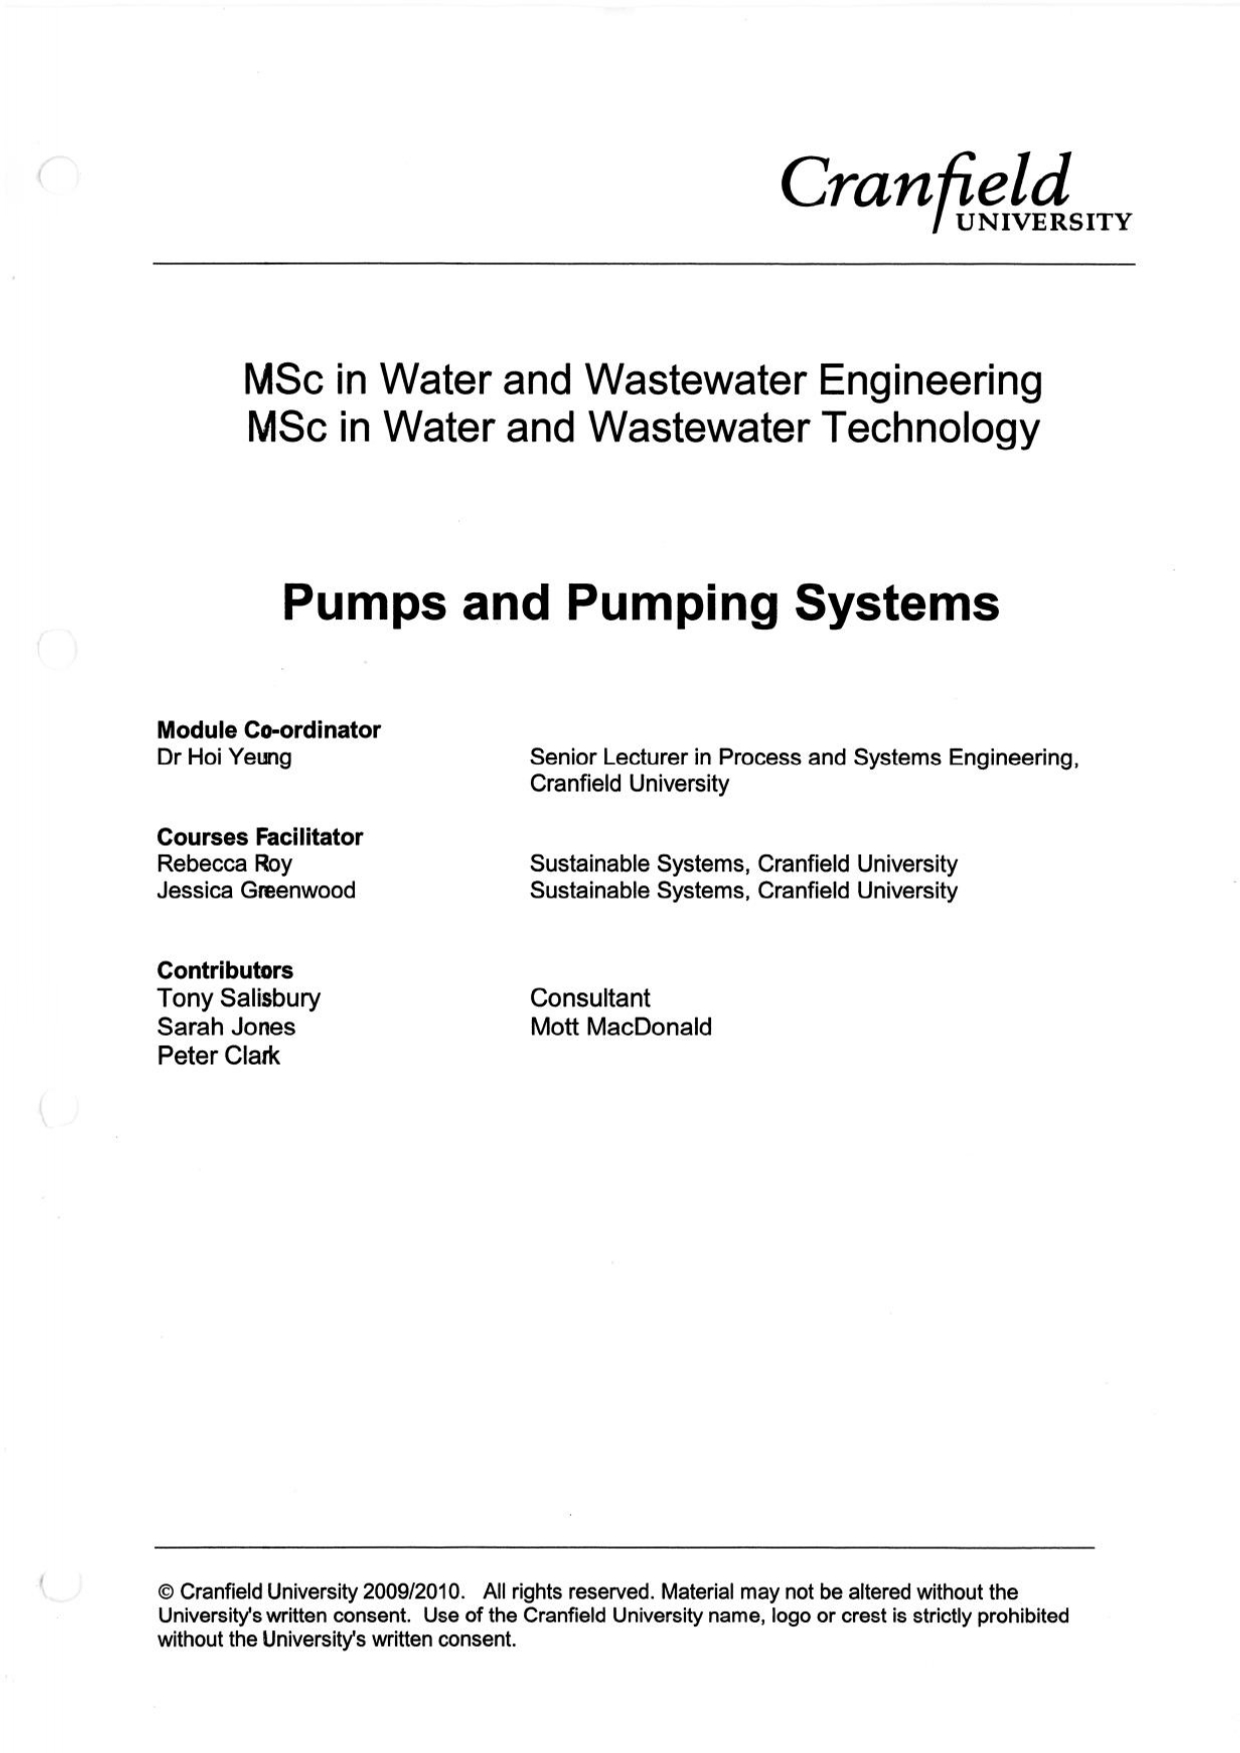 Pump & Pumping Systems